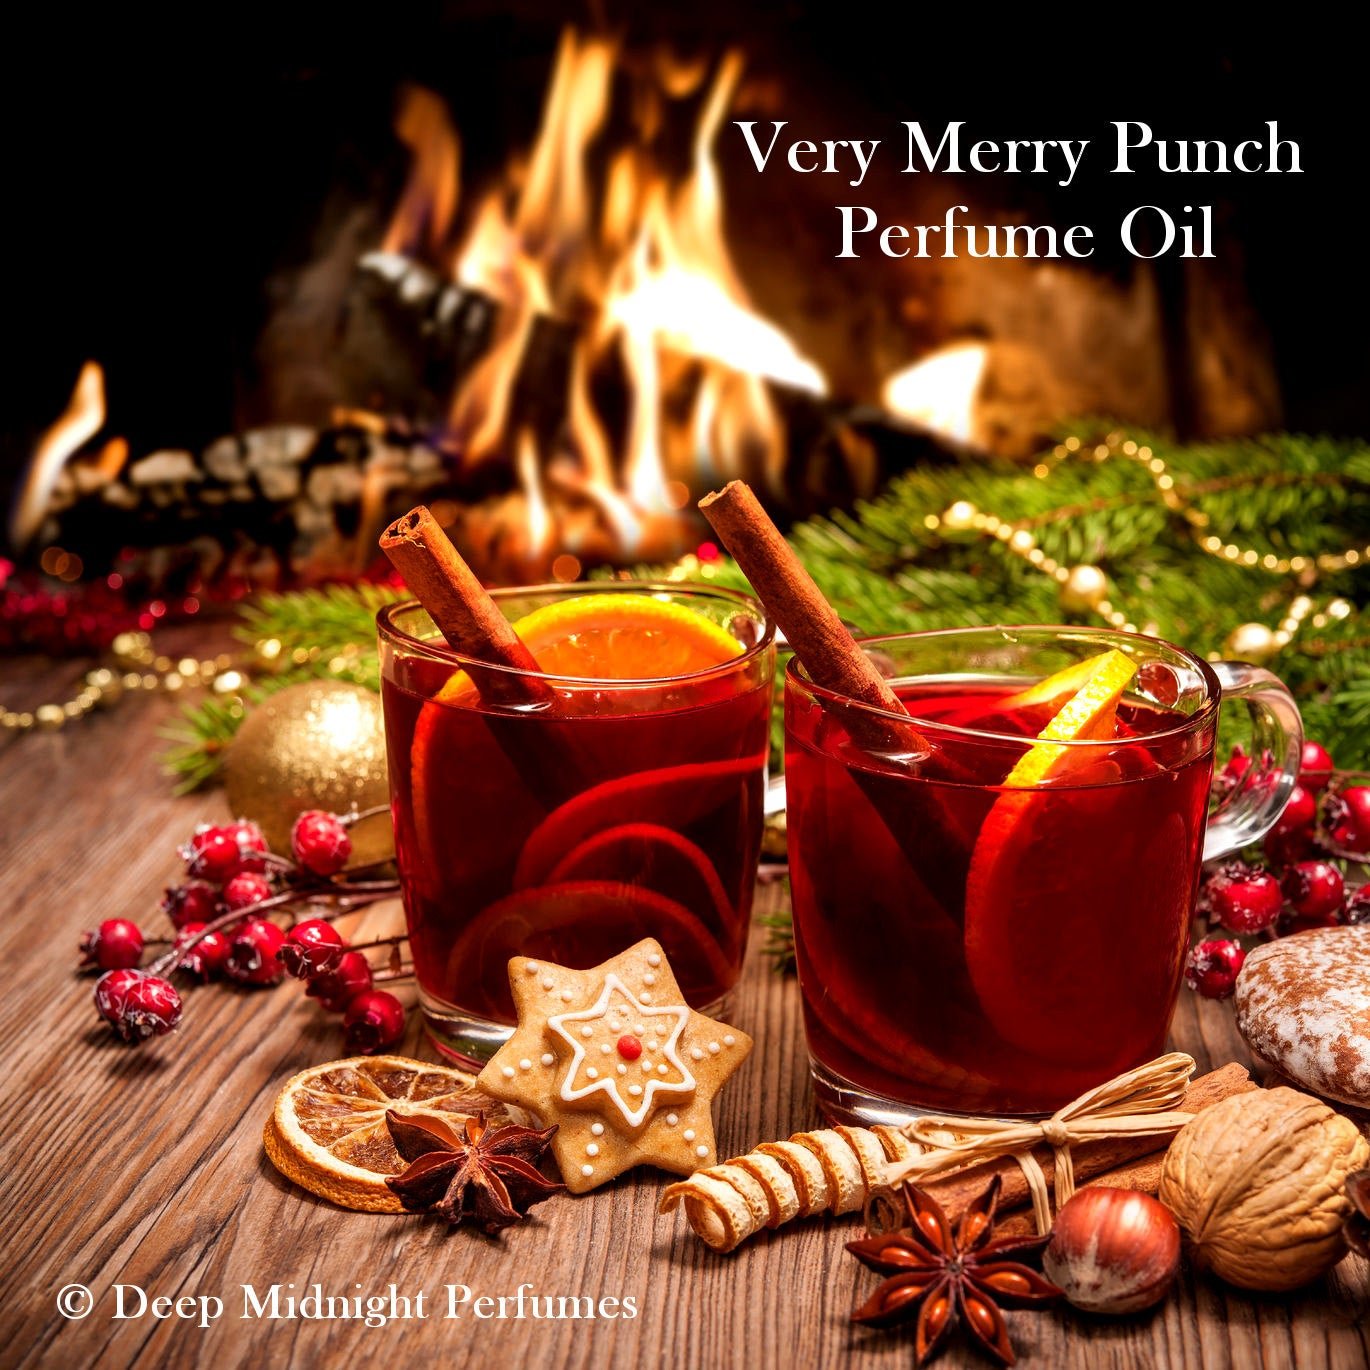 VERY MERRY PUNCH™ Perfume Oil - Cherries, Apple Slices, Snow Crystals, cognac, Berries, Amber, Woods - Christmas Perfume - Holiday Scent